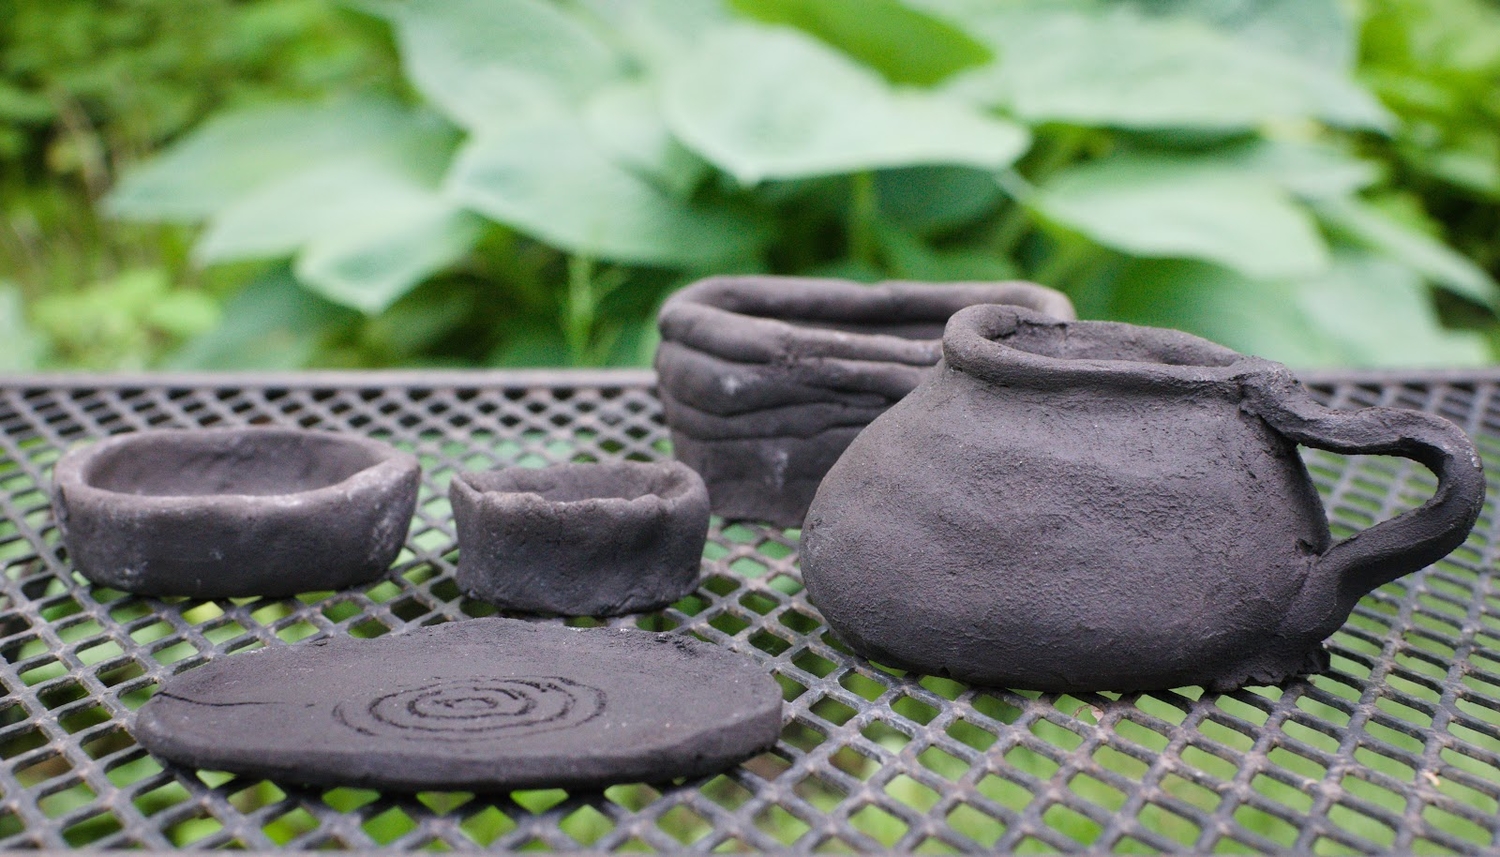 How to make pottery from scratch